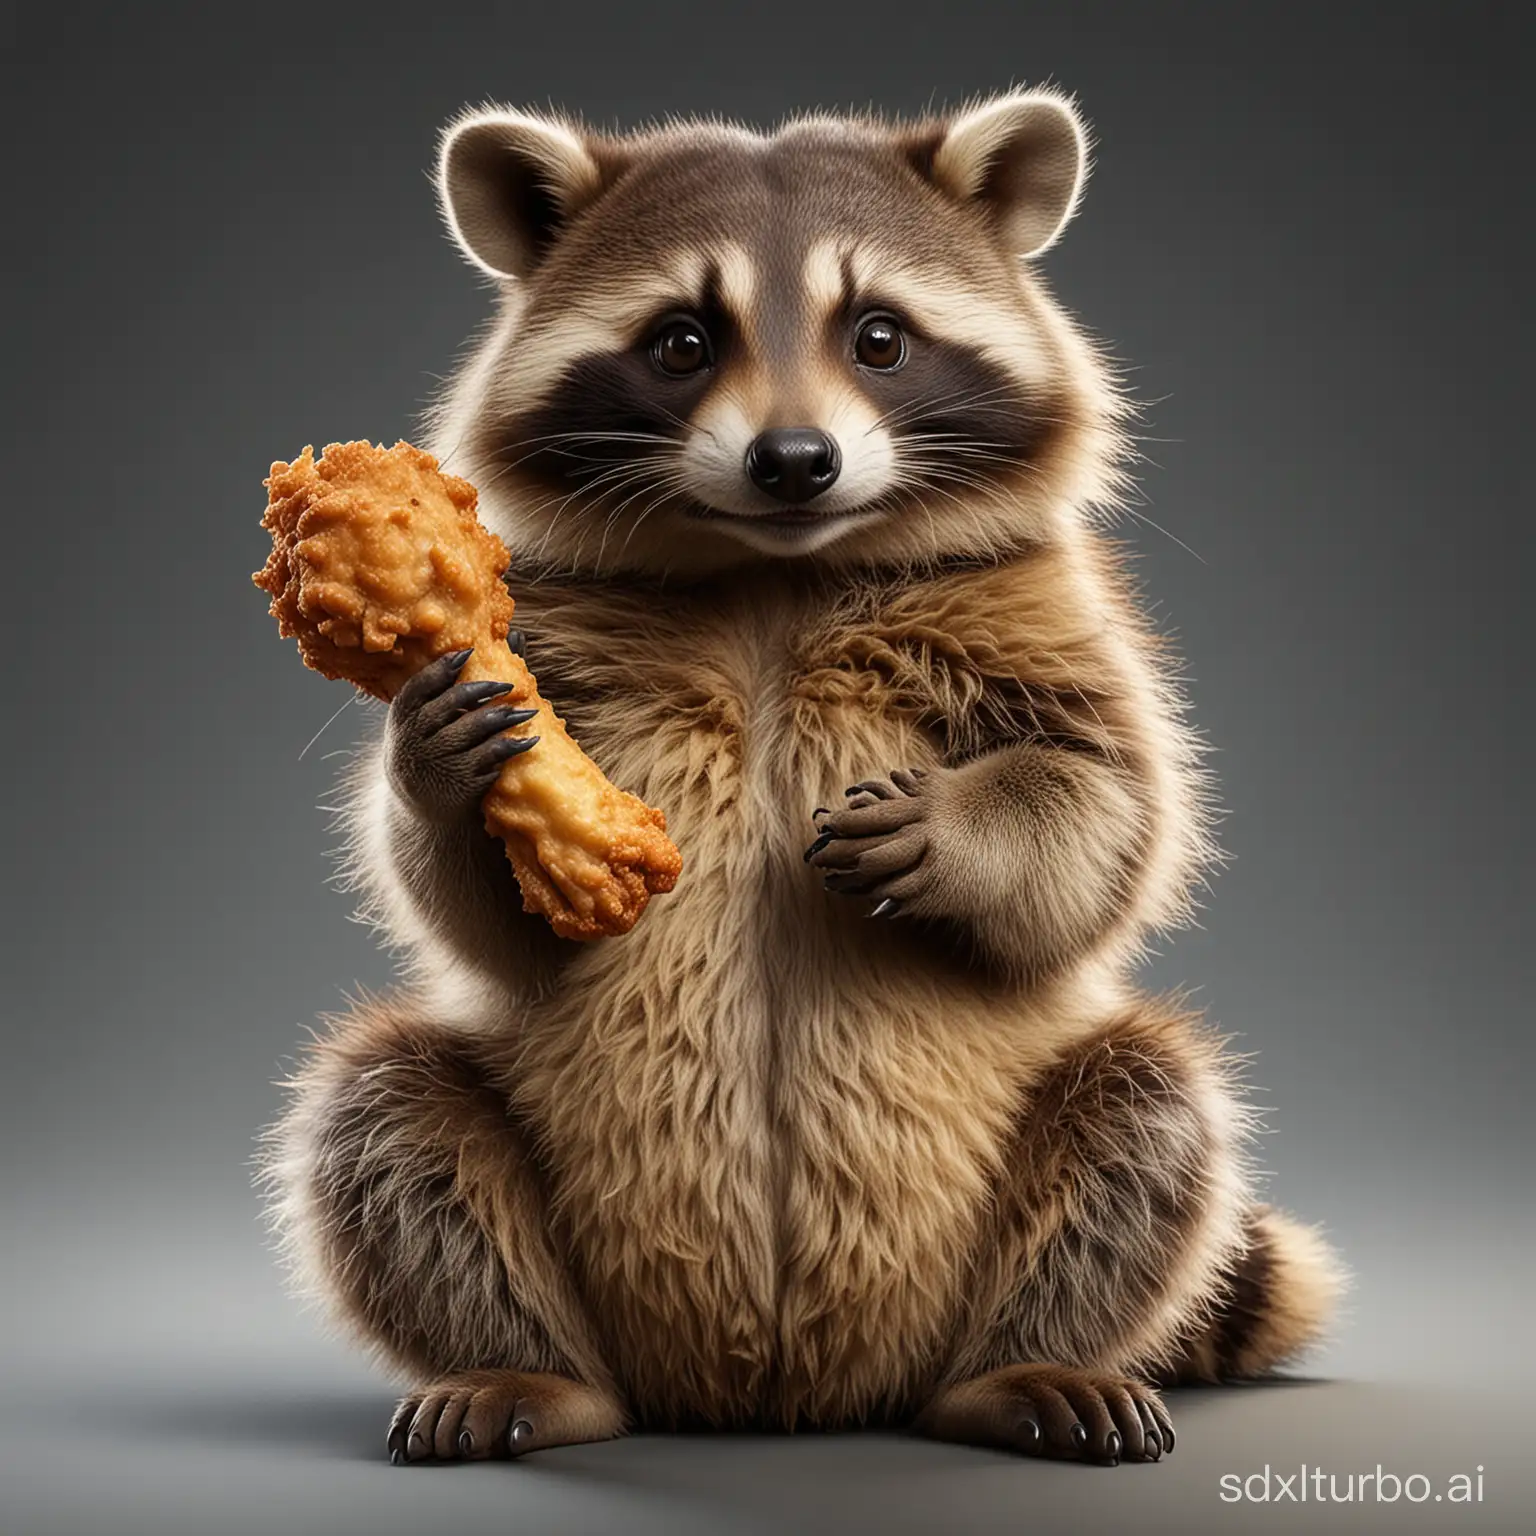 A very cute chubby Raccoon with very detailed fur is holding with both hands a deep fried breaded chicken drumstick,  this is a full body portrait shot on a fully transparent background rendered in a  very Realistic high resolution 64 bit photo quality rendering.